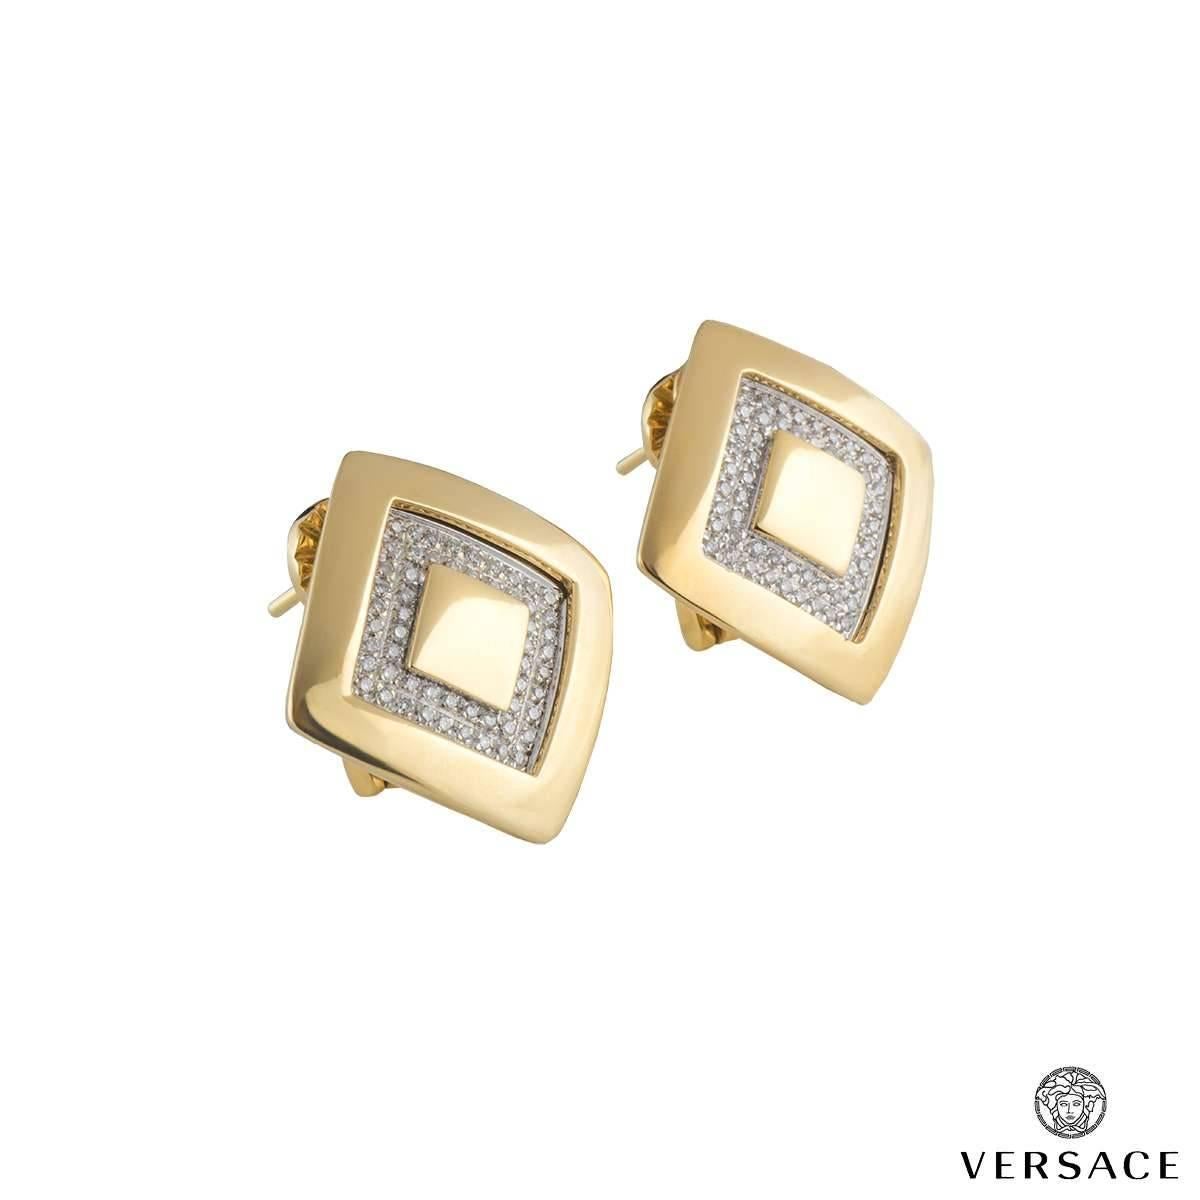 A statement Versace suite. The 18k yellow gold pendant and earrings are of geometric design with a diamond set inner boarder. The diamonds are bright, Colour G, Clarity VS, totalling approximately 0.84ct. The gross weight of all three pieces totals